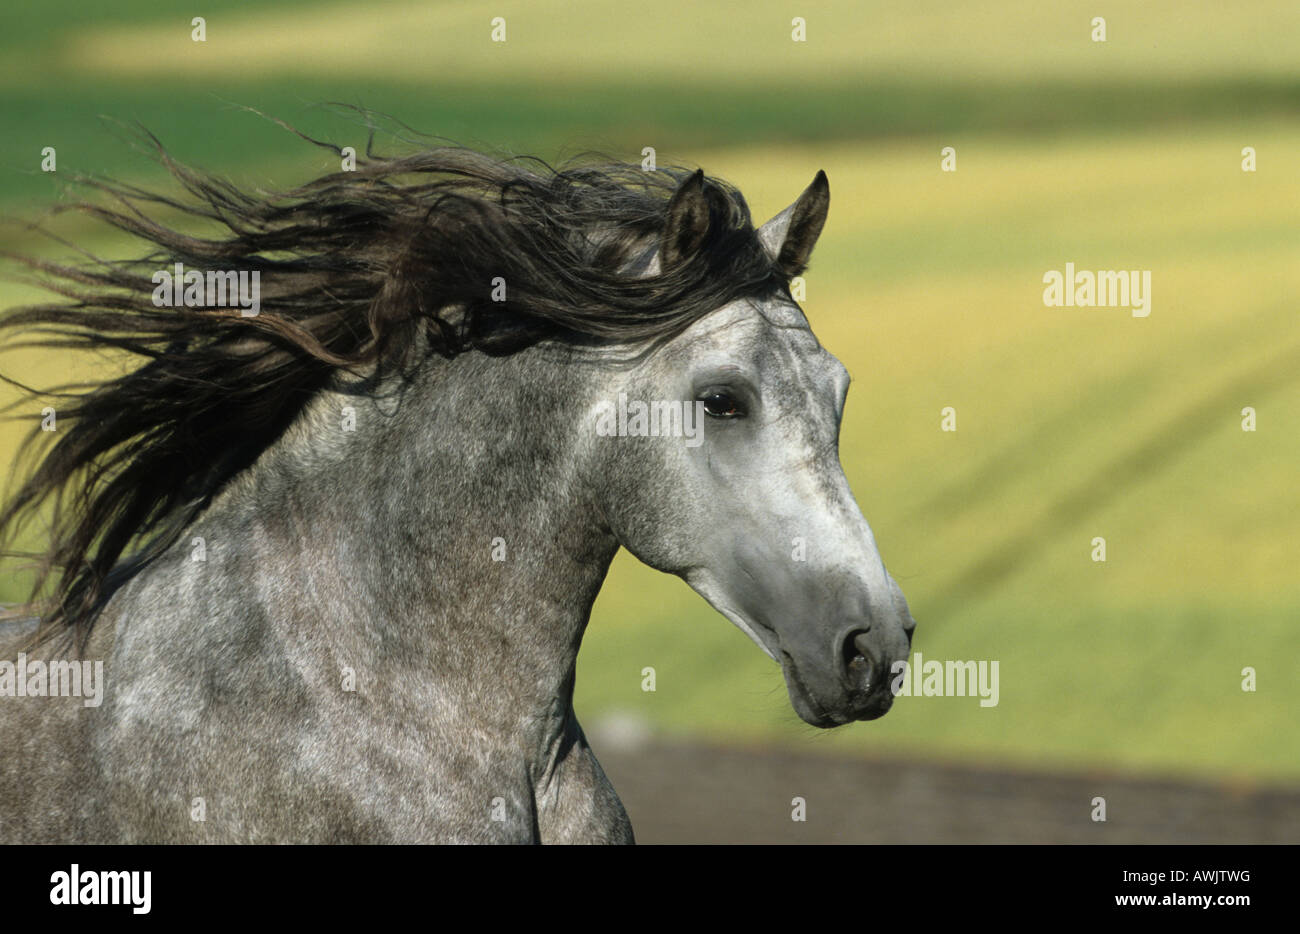 Andalusian Horse (Equus caballus) portrait of stallion with mane flowing Stock Photo